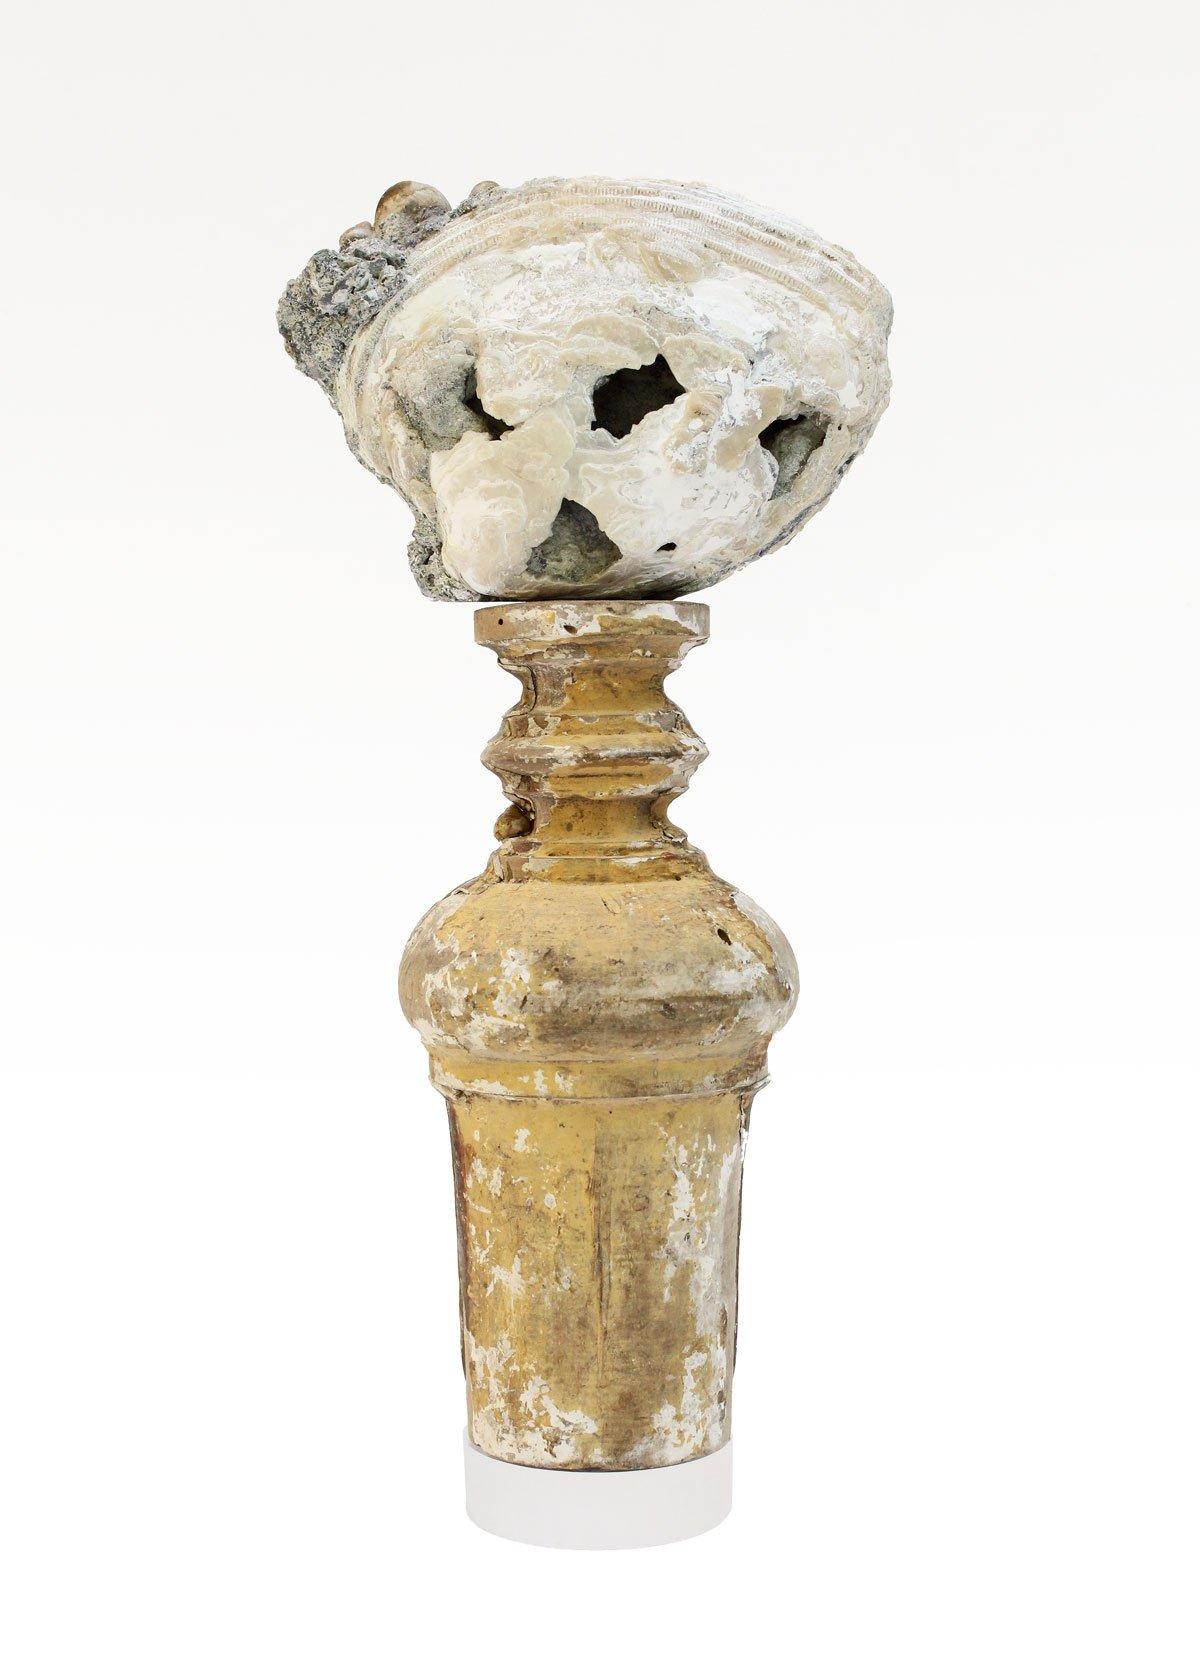 Crystal 18th Century Decorated Italian Candlestick Artifact with a Fossil Clam Shell